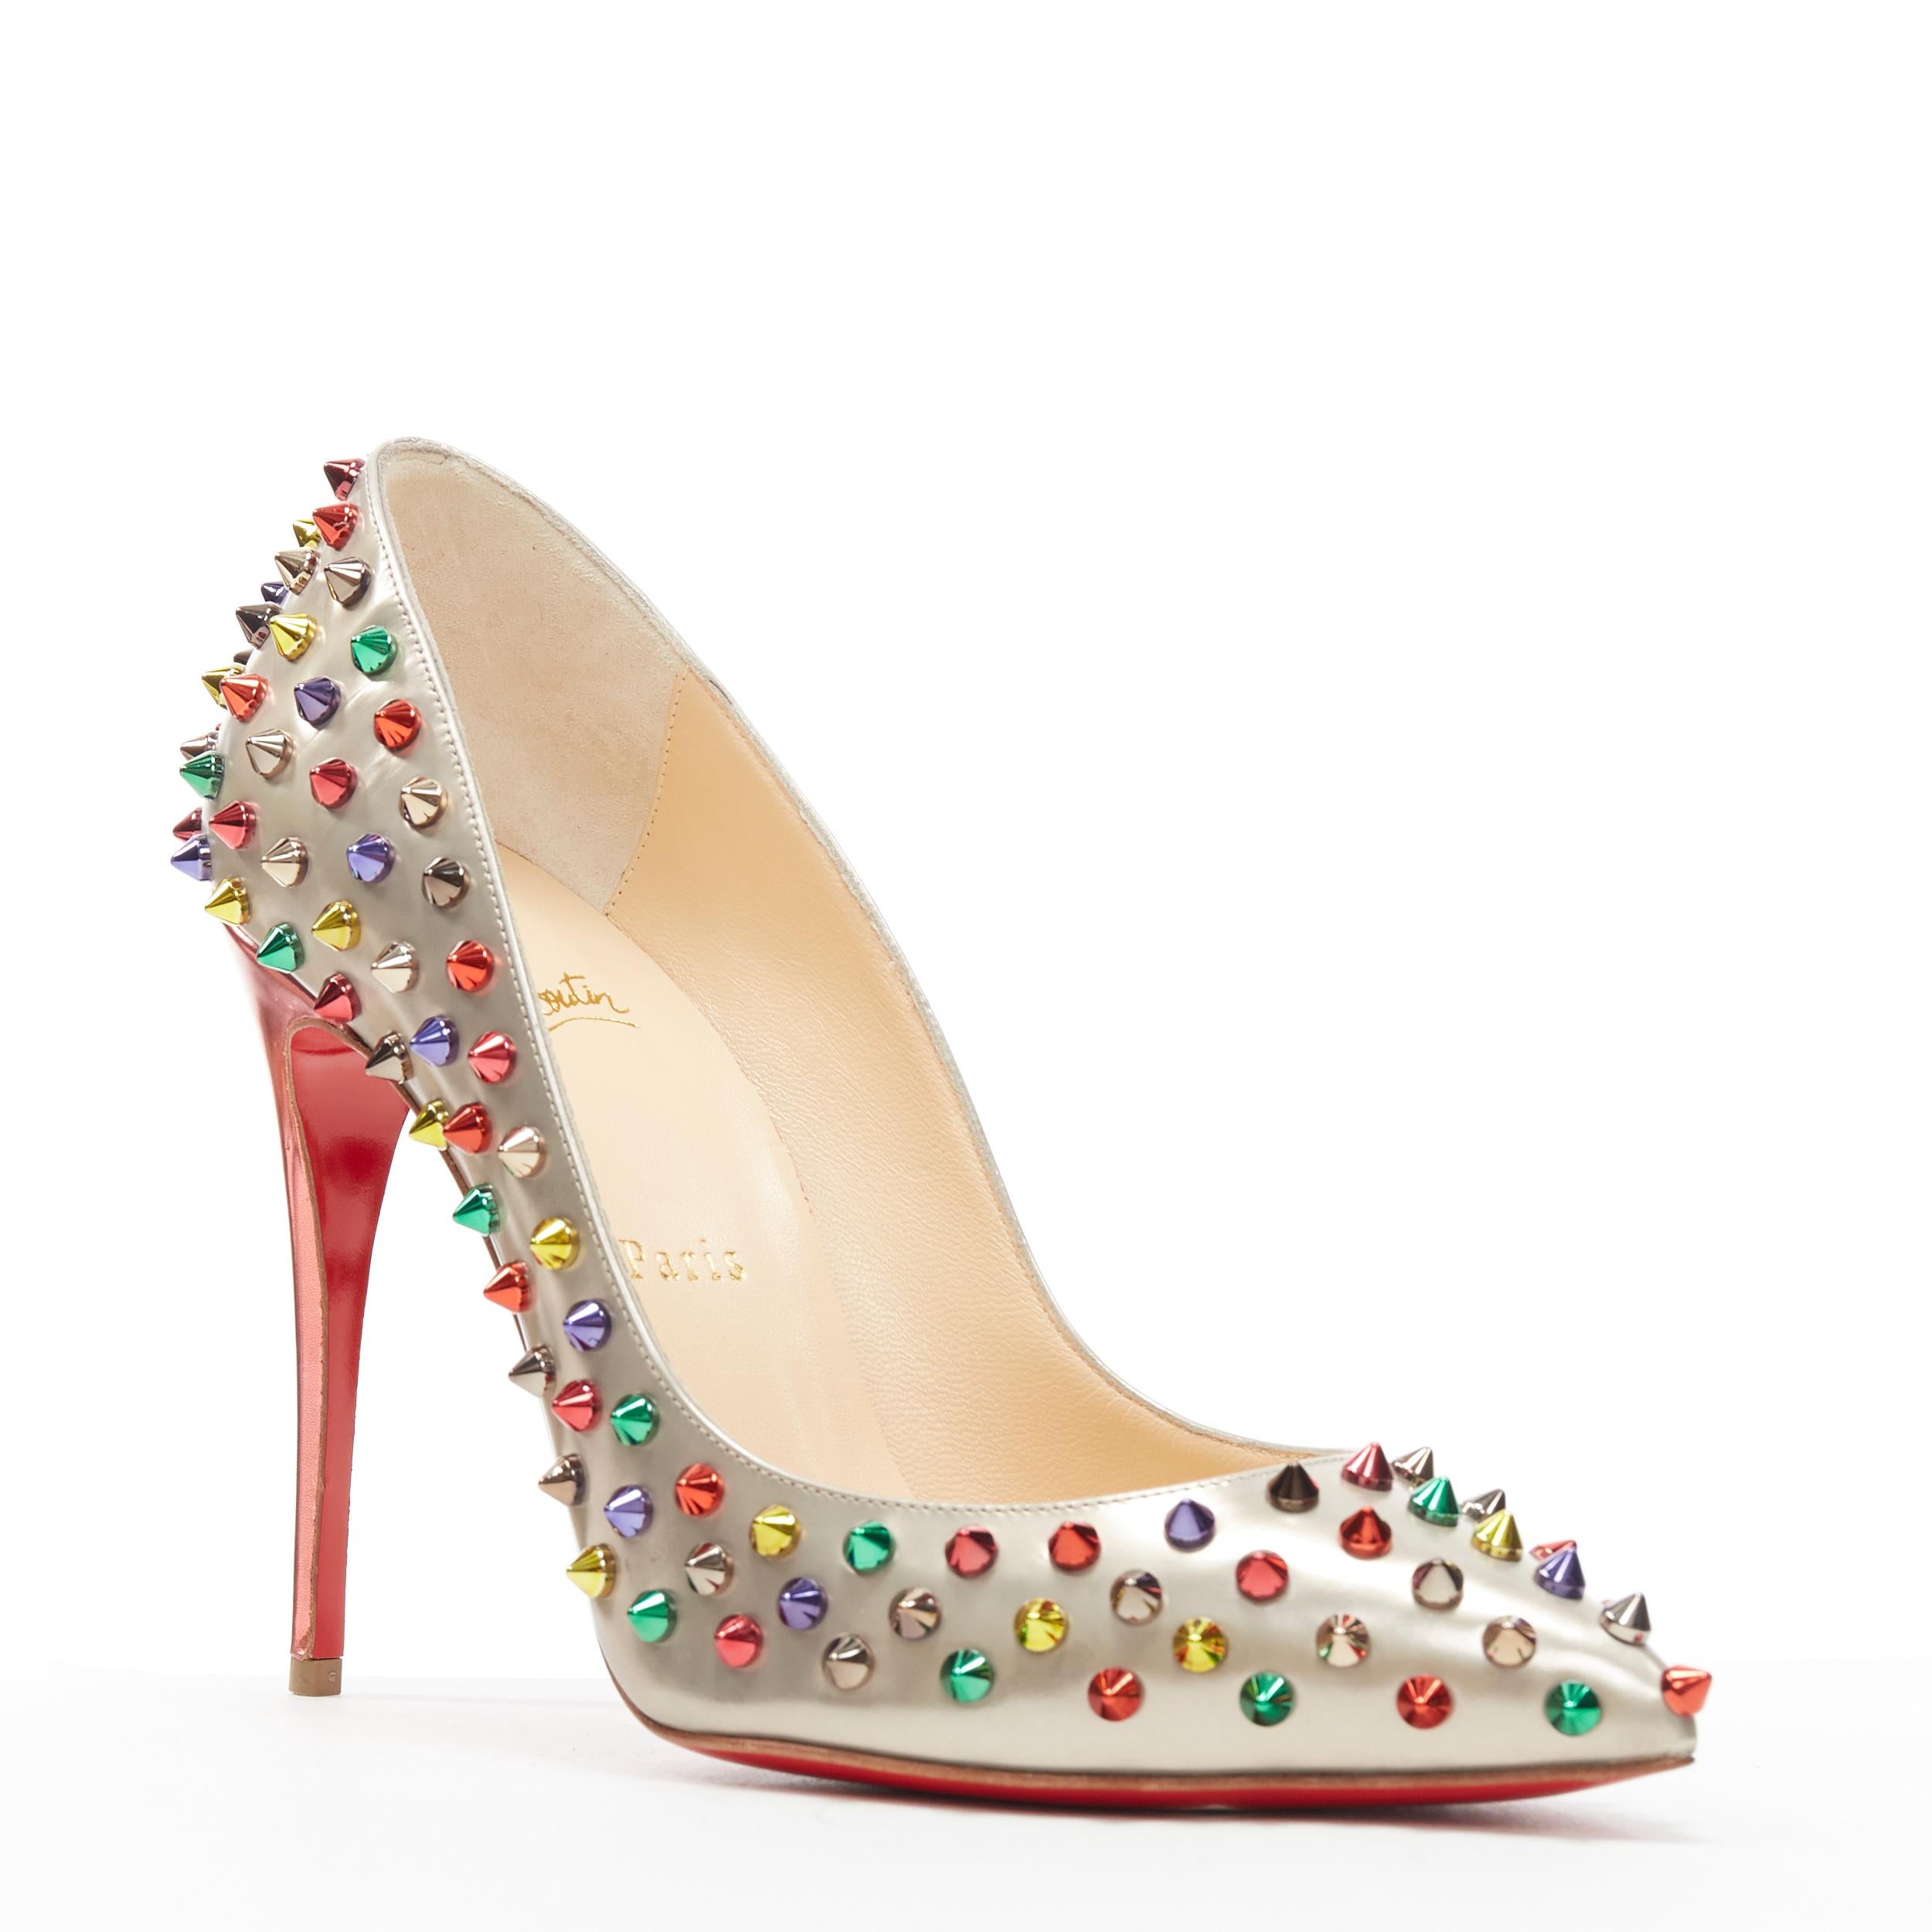 new CHRISTIAN LOUBOUTIN champagne multi spike stud pointed toe pump EU39
Brand: Christian Louboutin
Designer: Christian Louboutin
Model Name / Style: Spike pump
Material: Leather
Color: Gold
Pattern: Solid
Extra Detail: Allover metallic spike stud